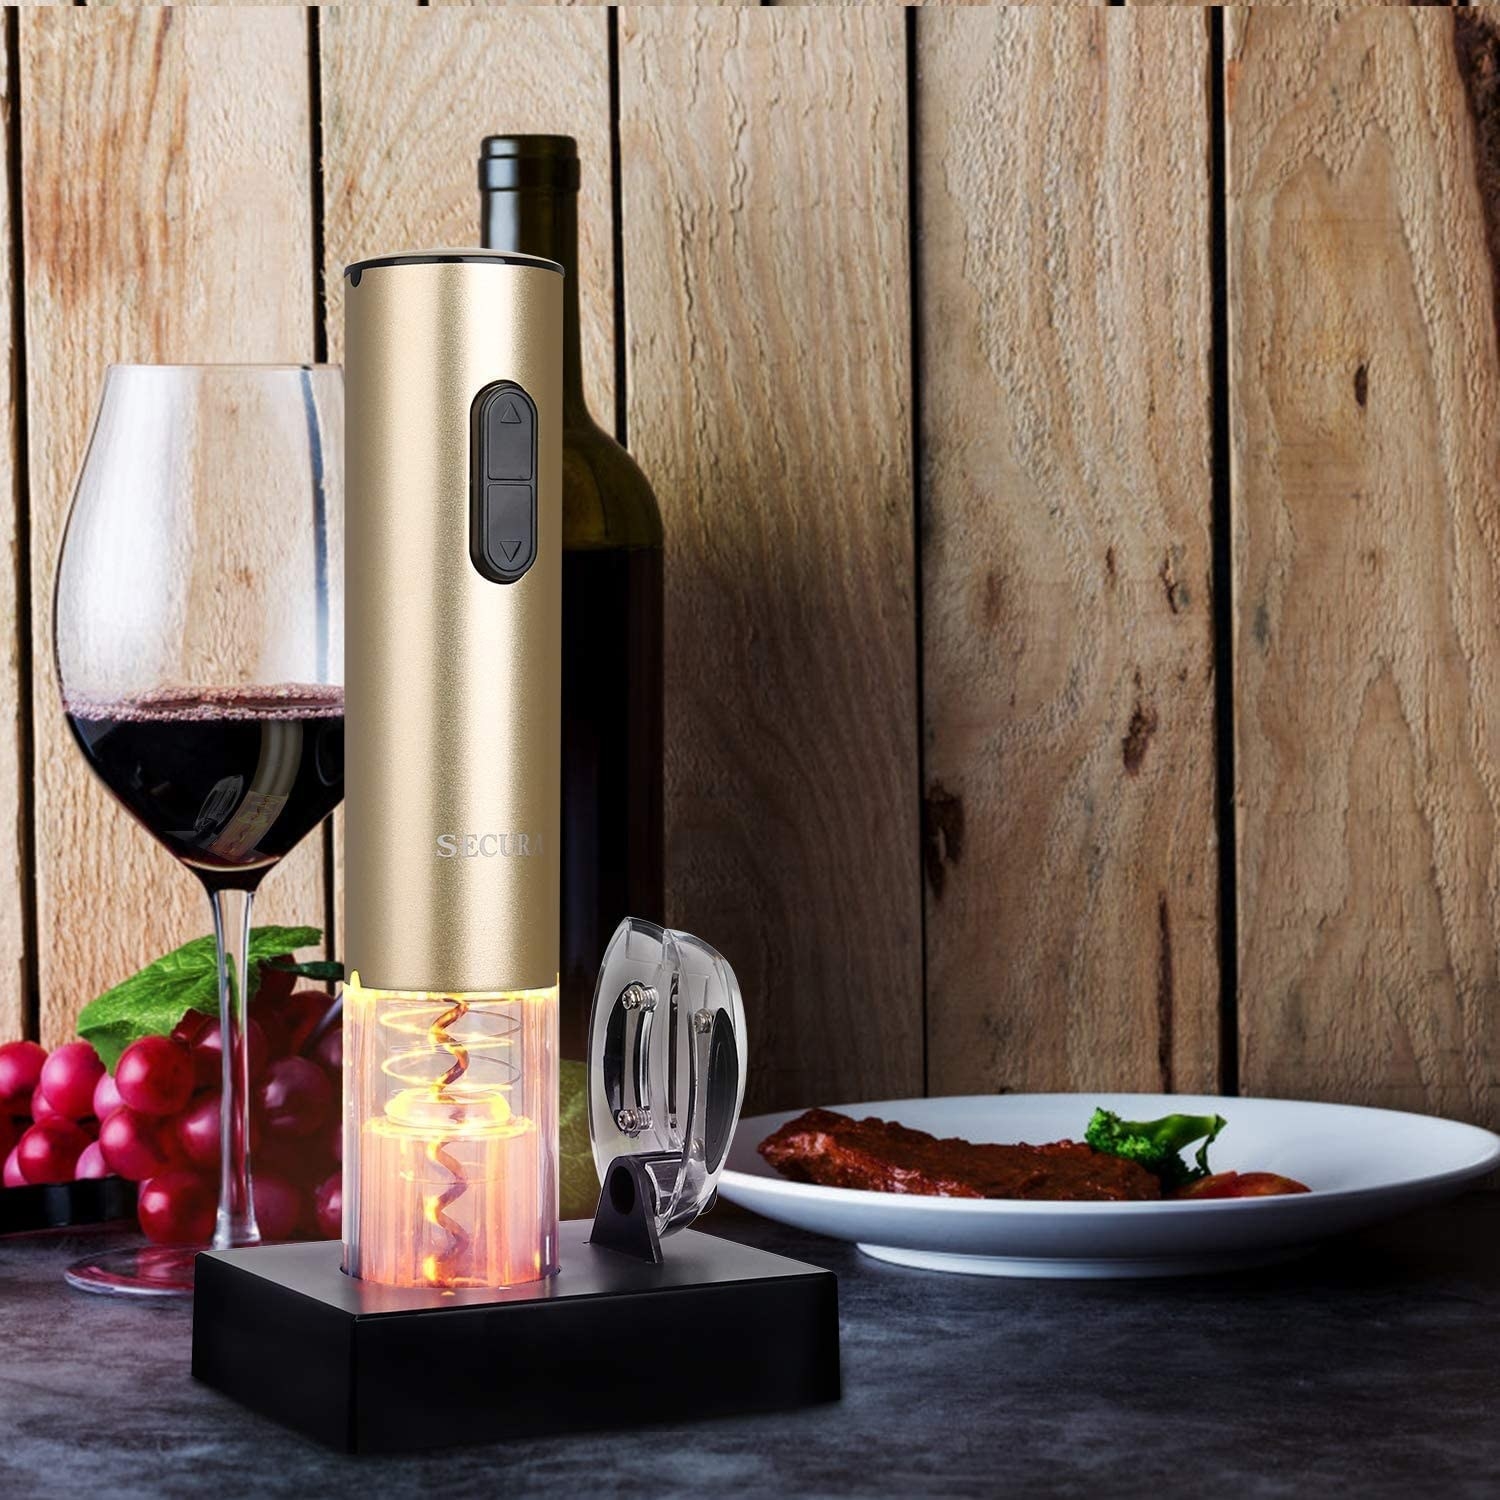 the wine bottle opener beside a glass and bottle of wine and a plate of food